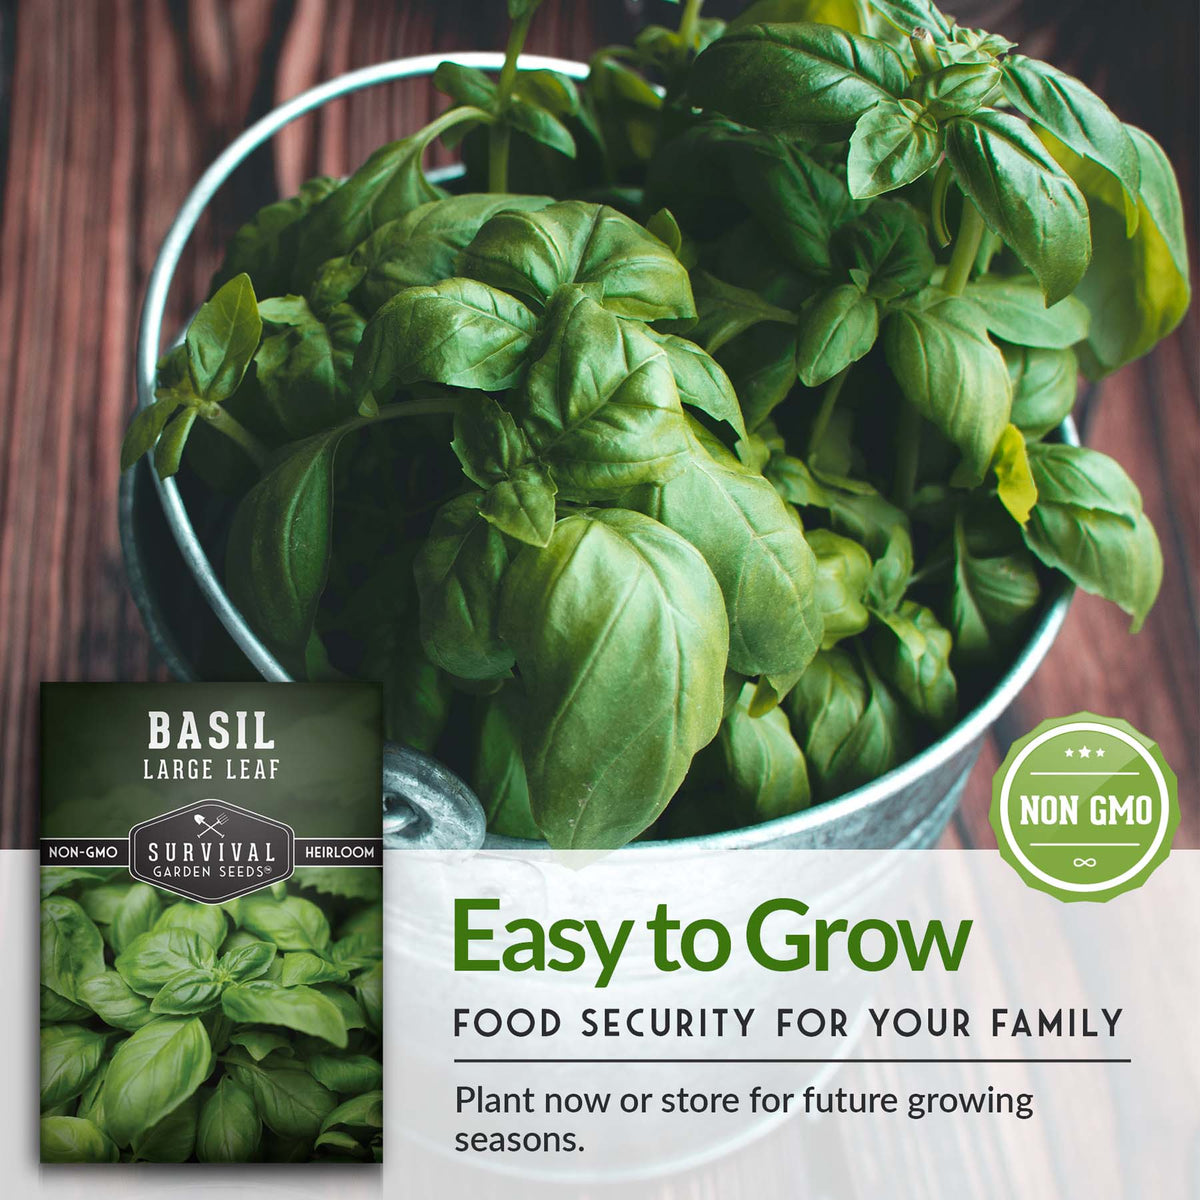 Large leaf basil is easy to grow